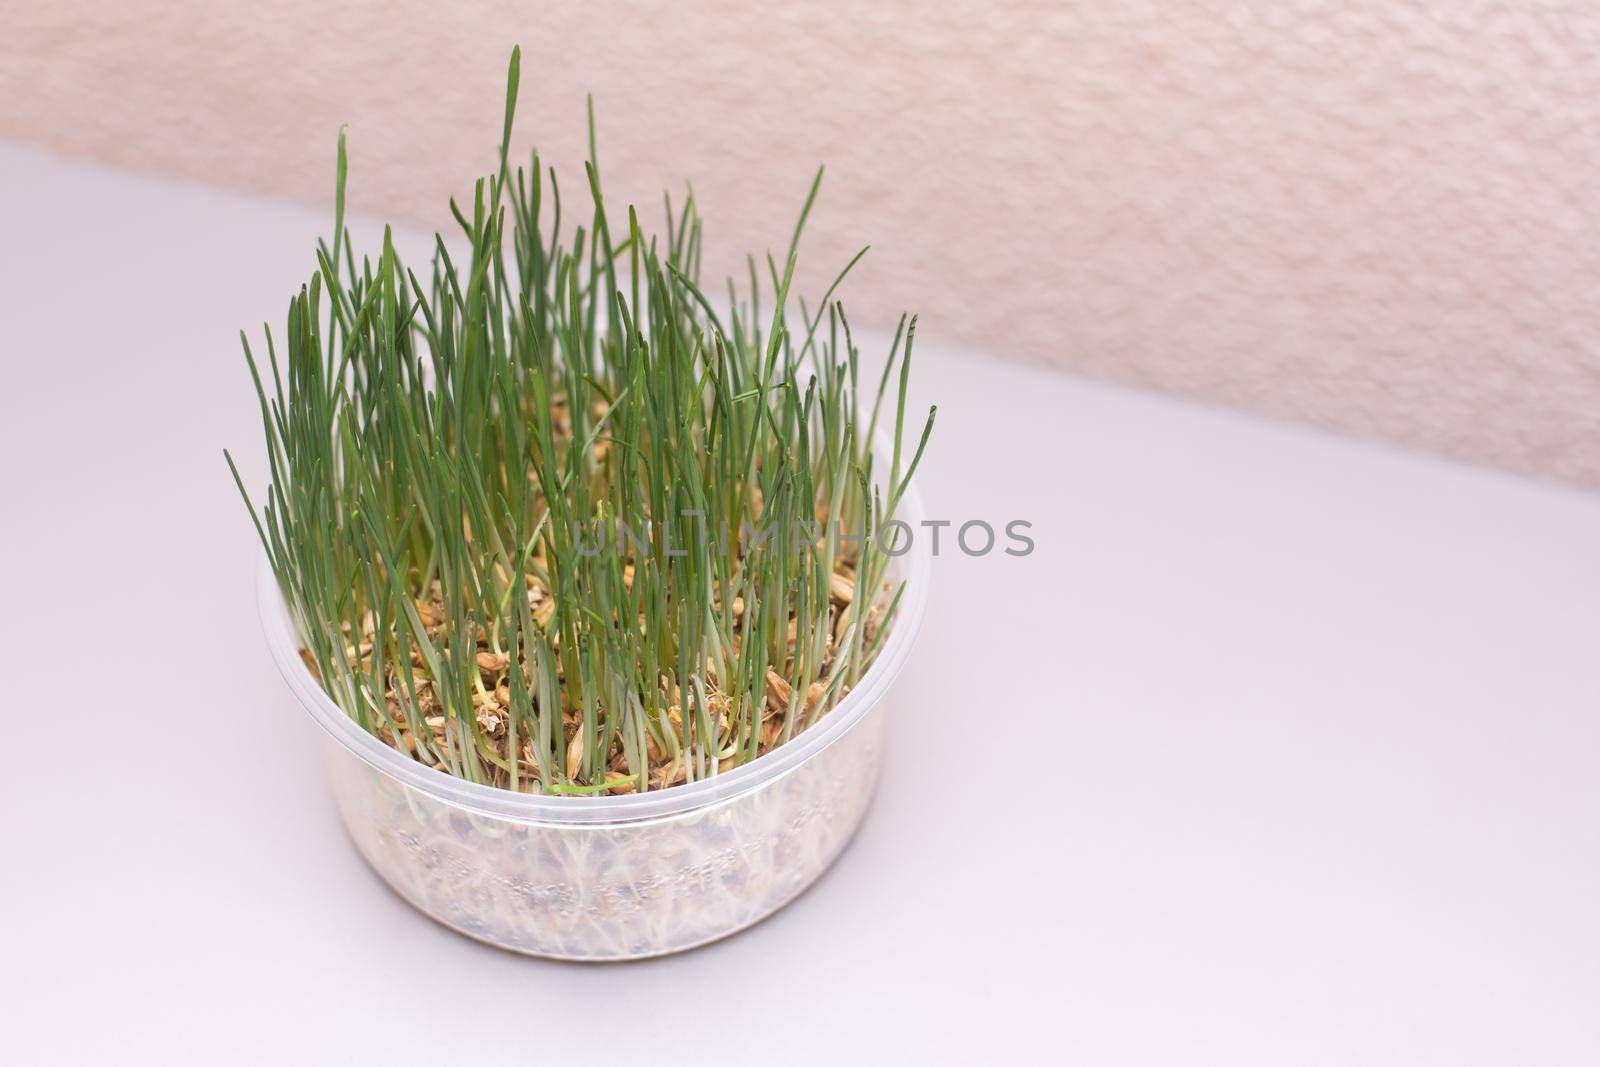 Green grass in a plastic container. Cat Grass